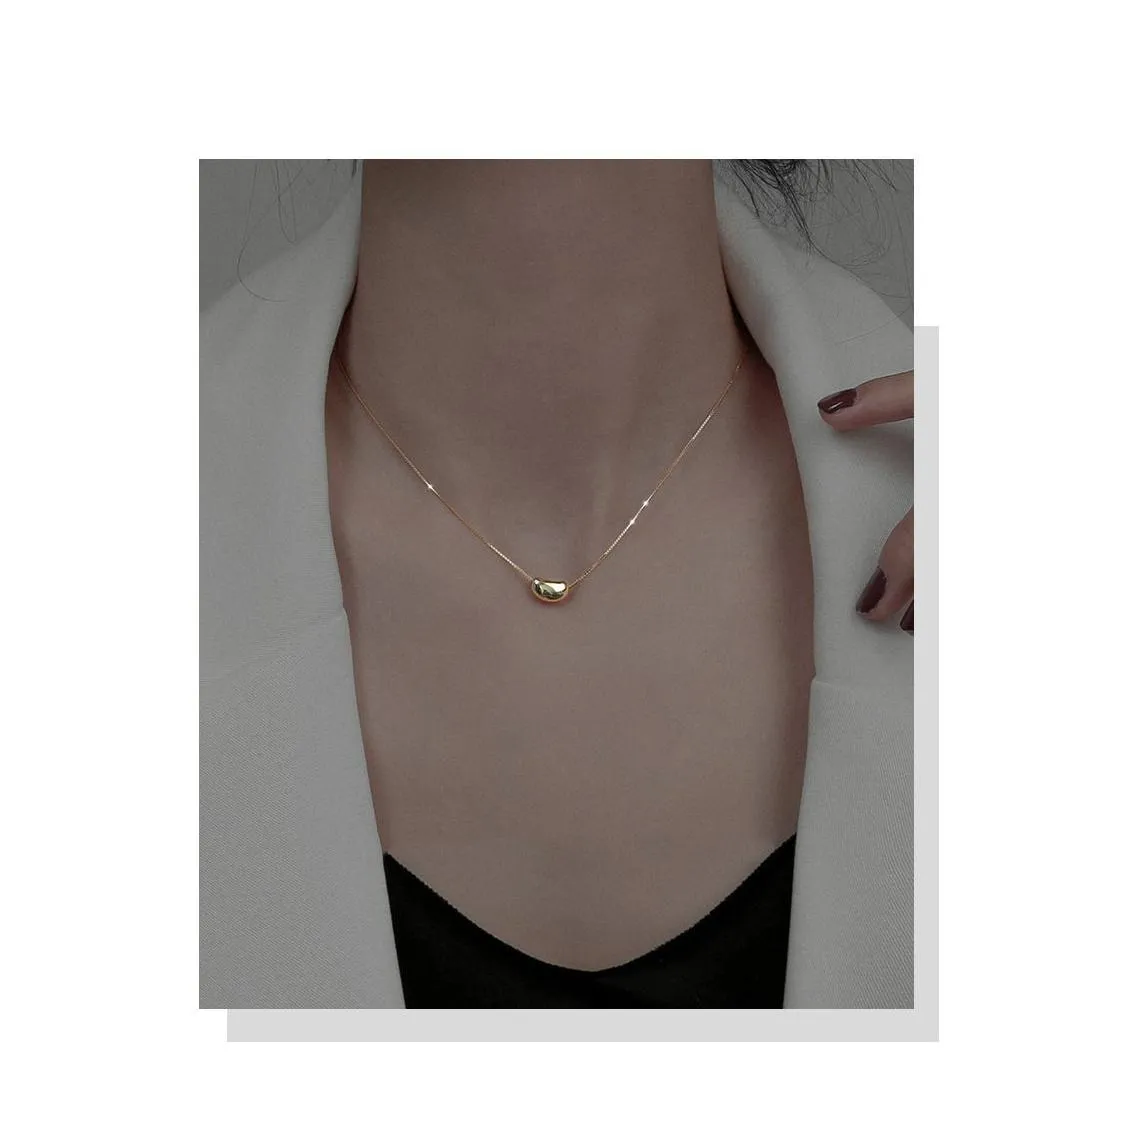 Pendant Necklaces New Korea Vintage Gold Sier Color Acacia Beans Pendant Choker Necklace Jewelry For Women Girls Gift Jewelry Necklace Dh4L6